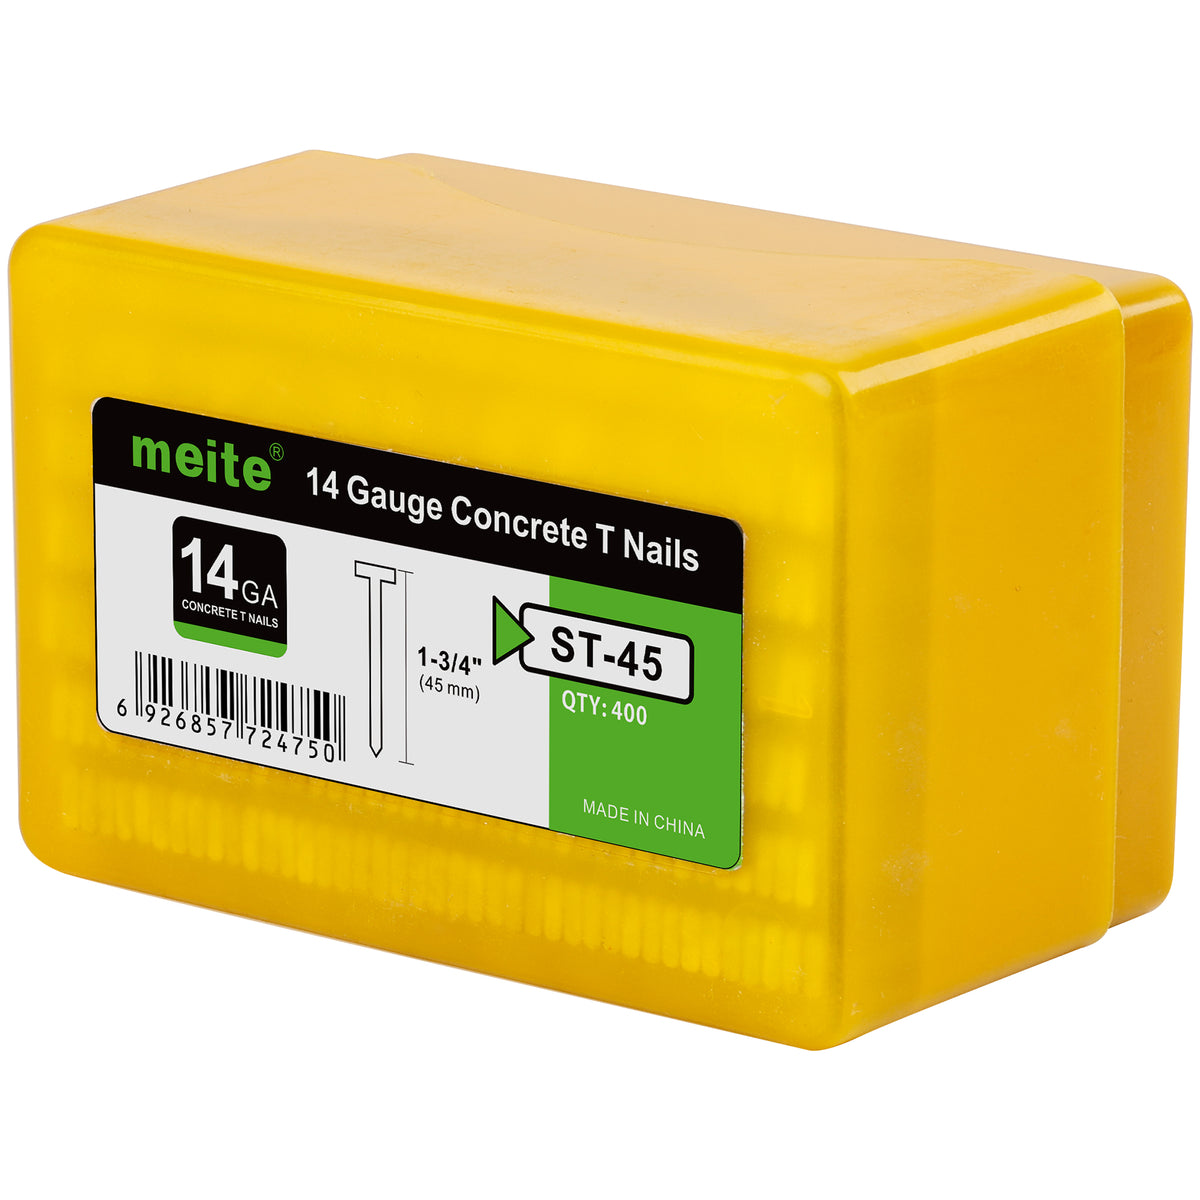 meite 14 Gauge Concrete T Nails Glue Collated Nails for Nailer (1-1/2" to 2") - MEITE USA